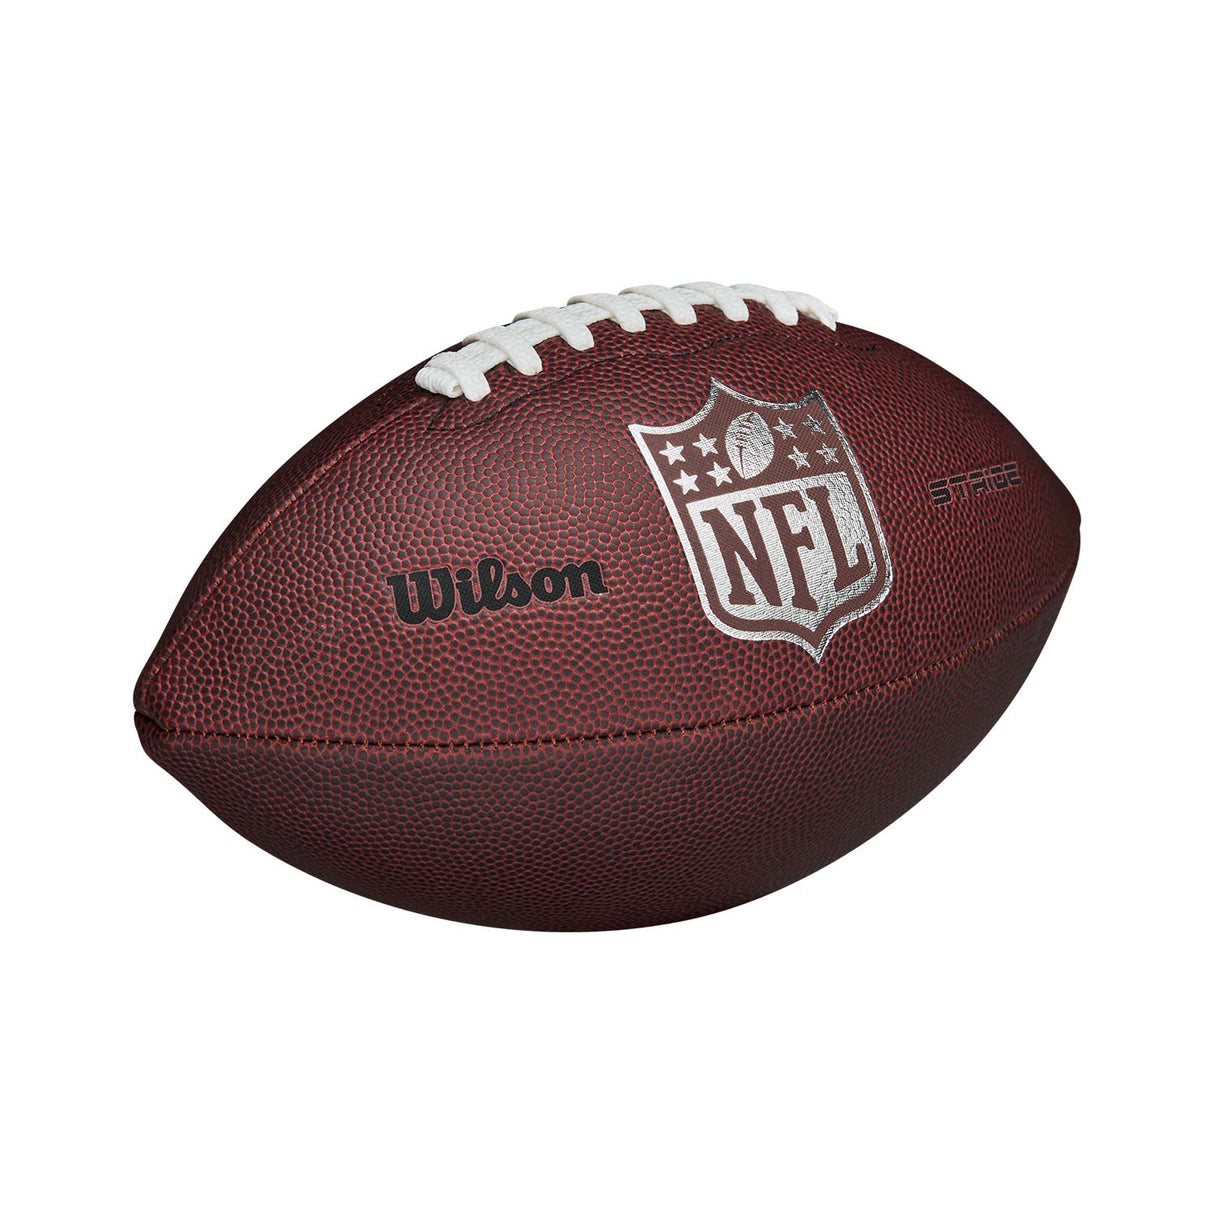 American Football - NFL Stride Official Size - Met NFL pro lacing